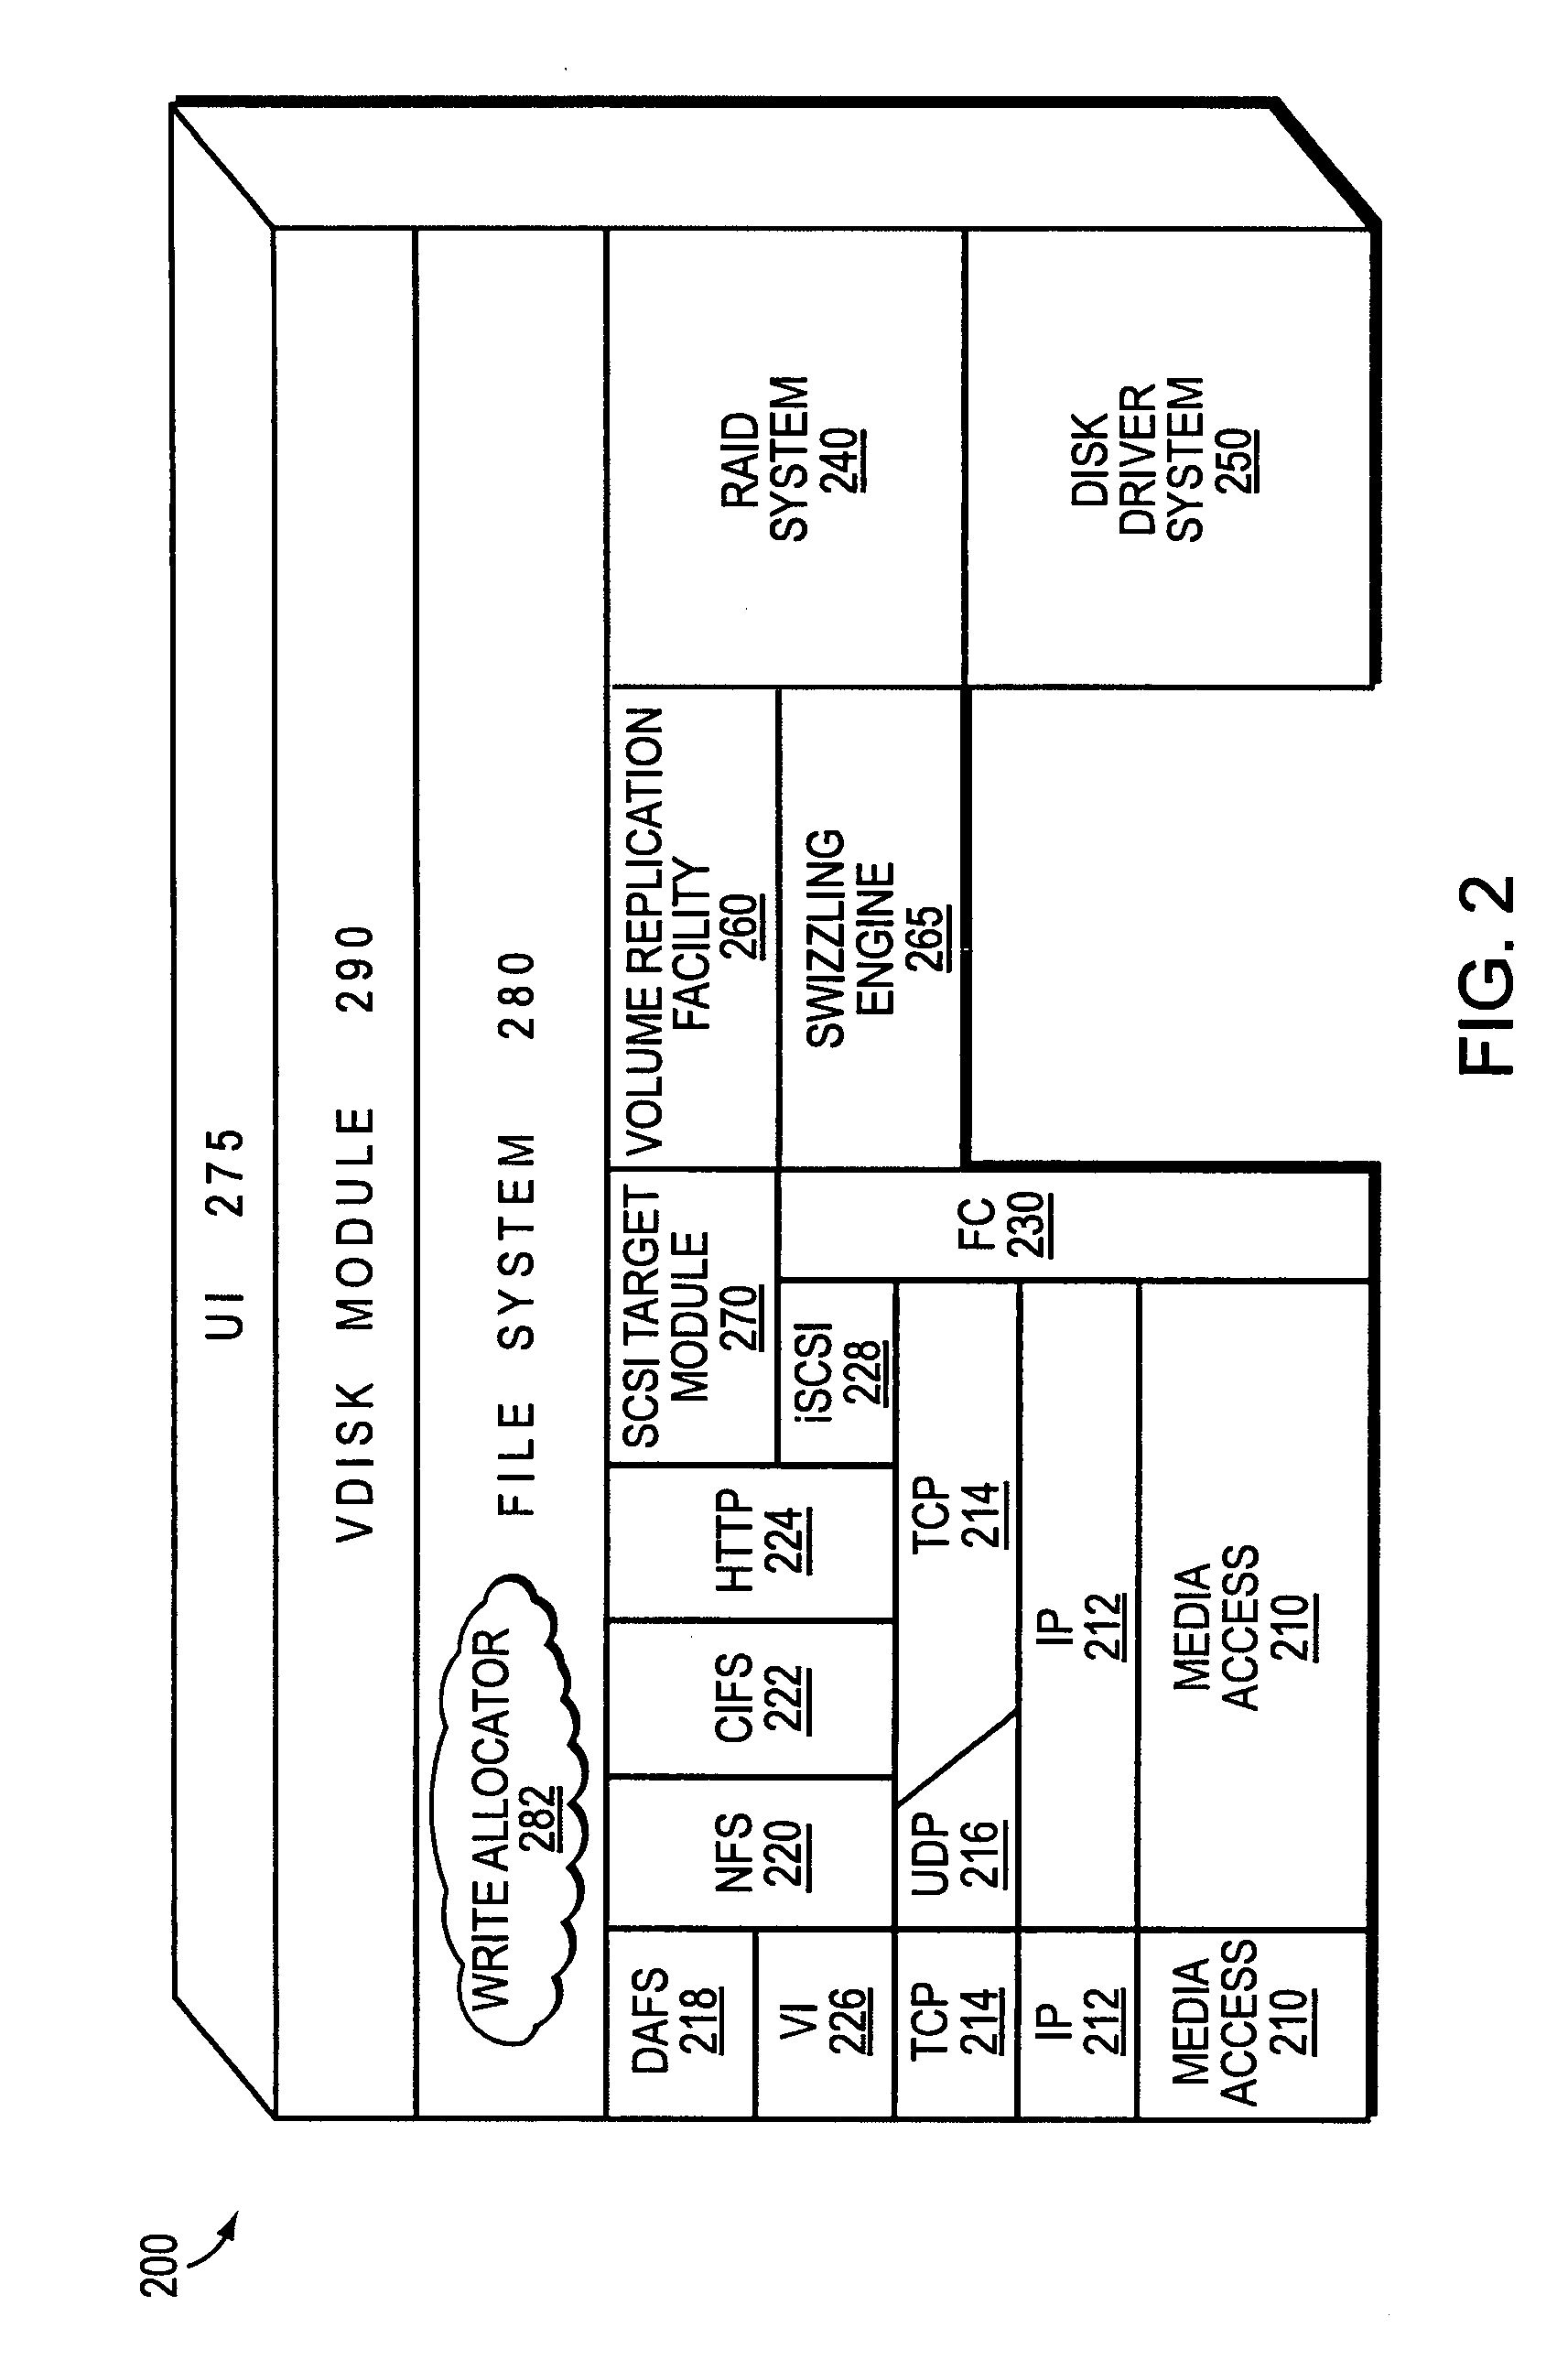 Technique for translating a hybrid virtual volume file system into a pure virtual file system data stream